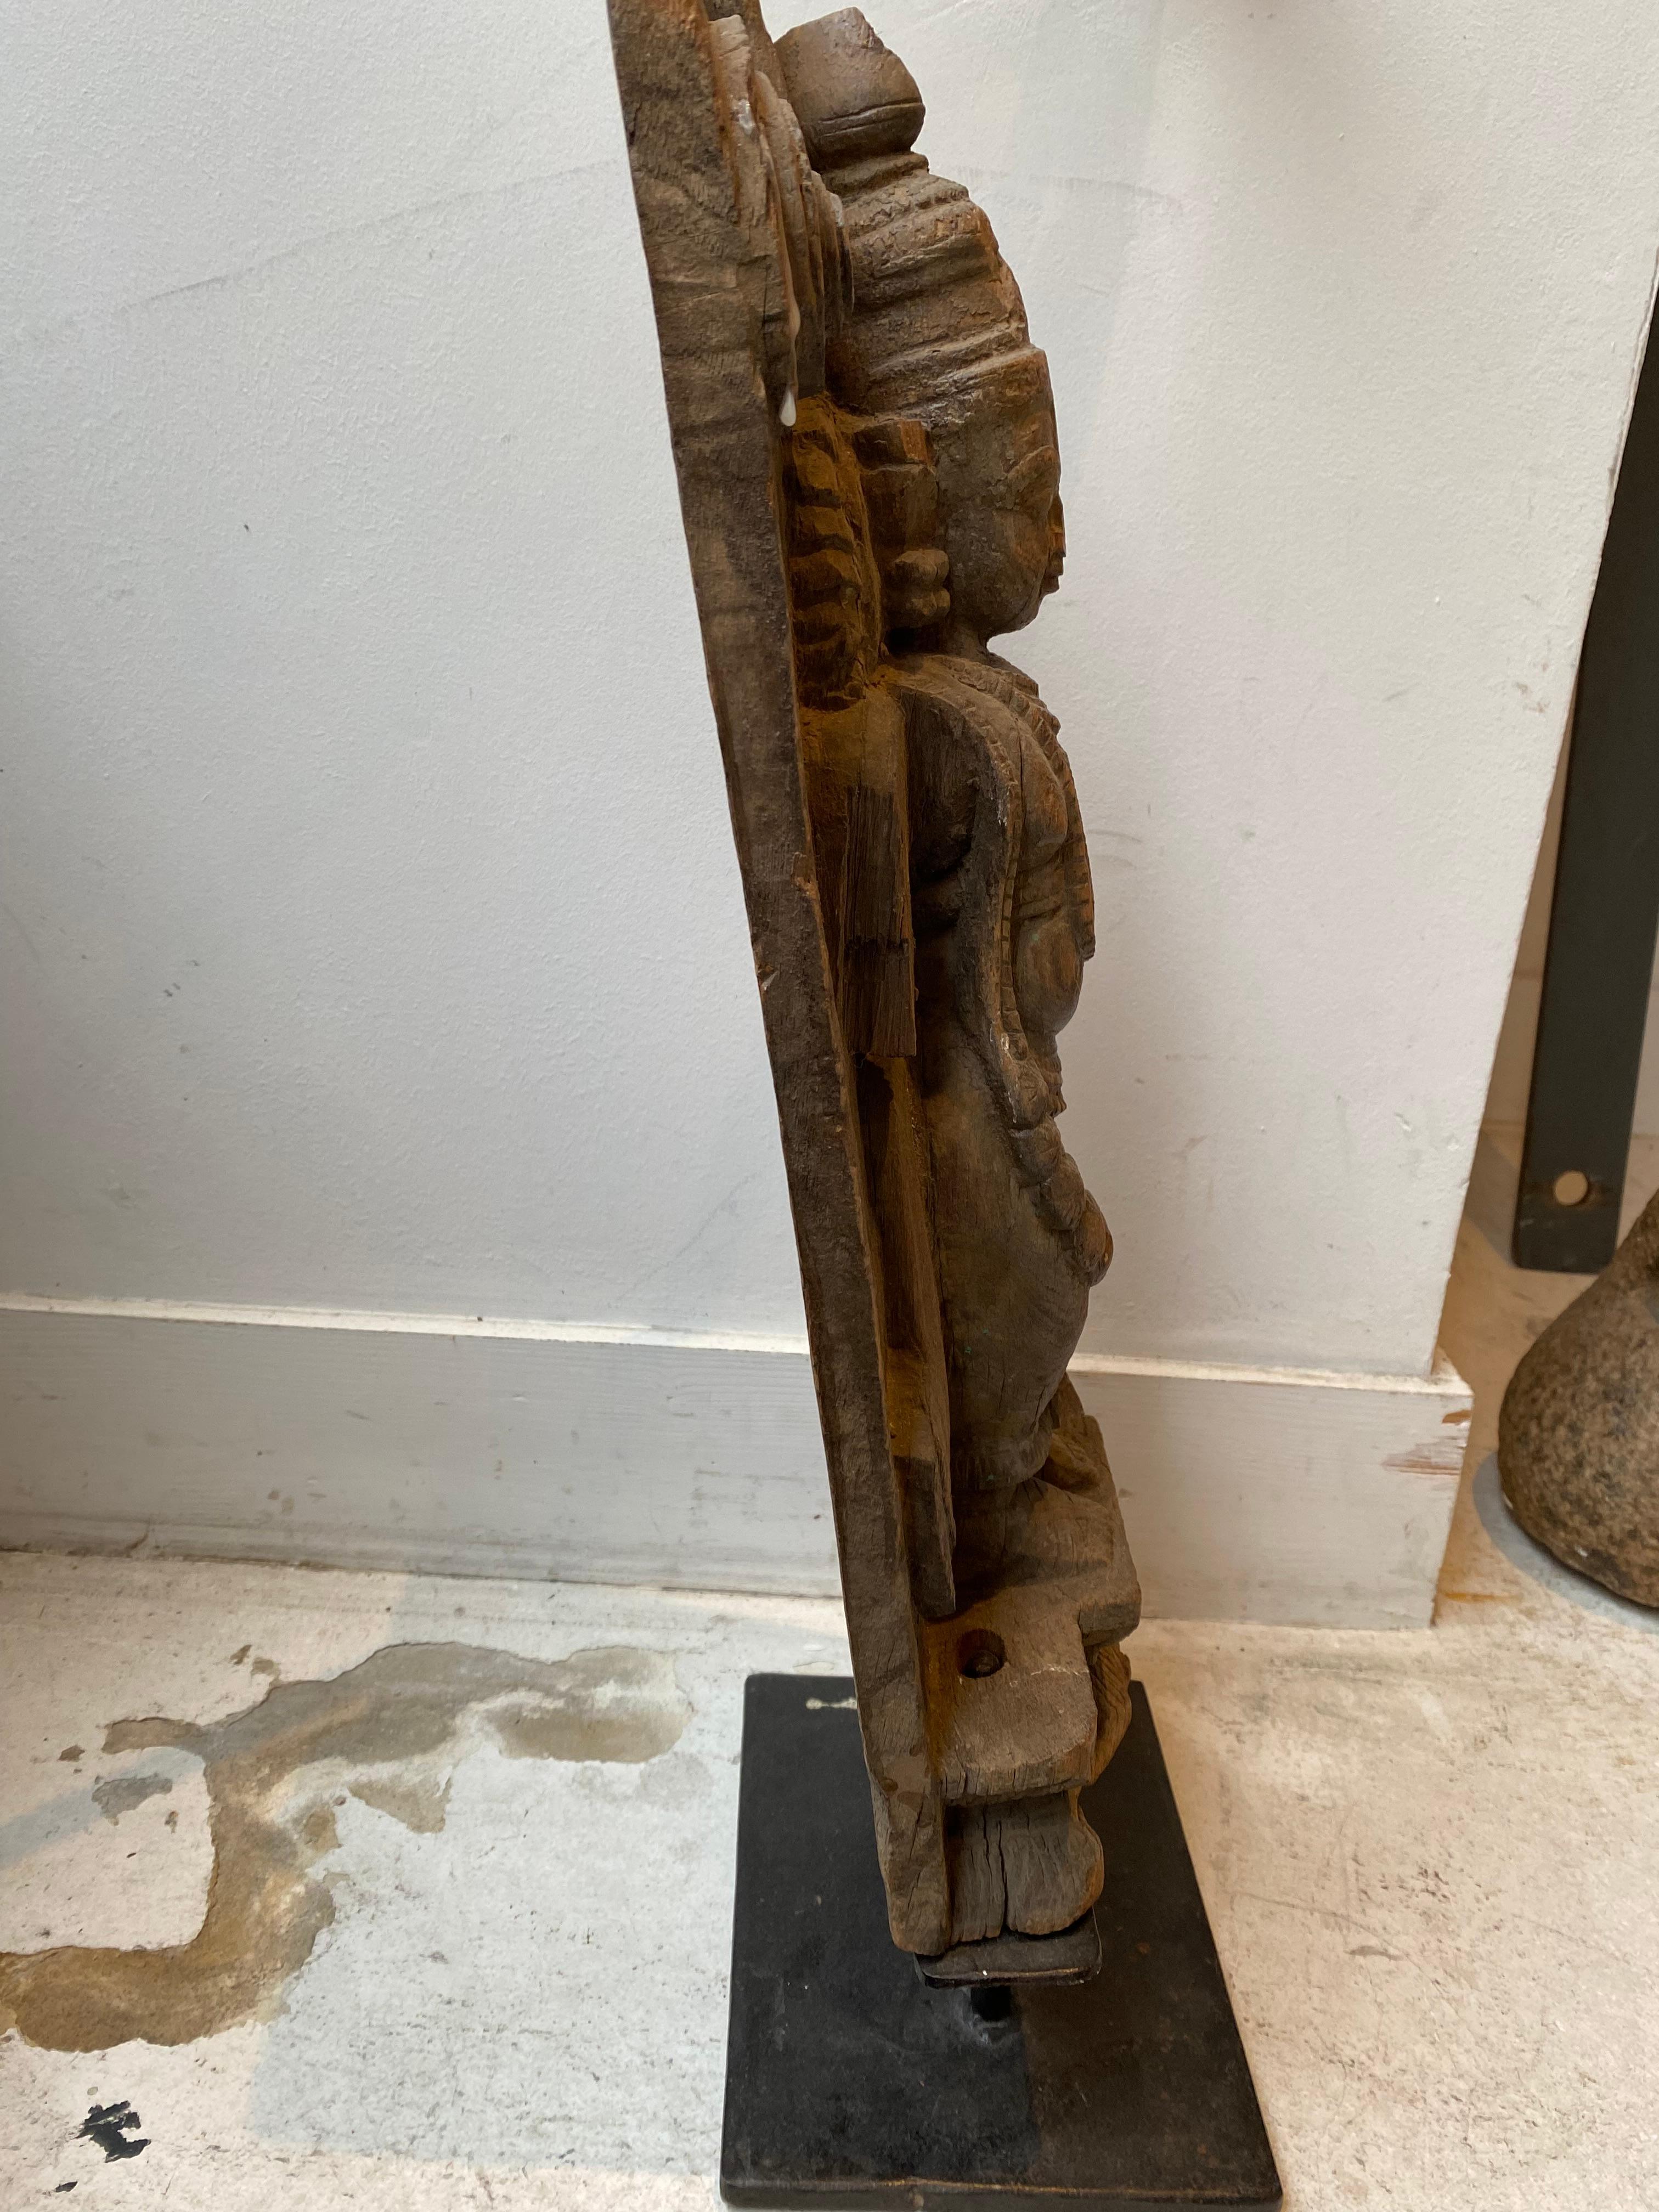 carved wooden sculpture representing a woman
it is mounted on a modern metal base
It cames from Rajasthan 